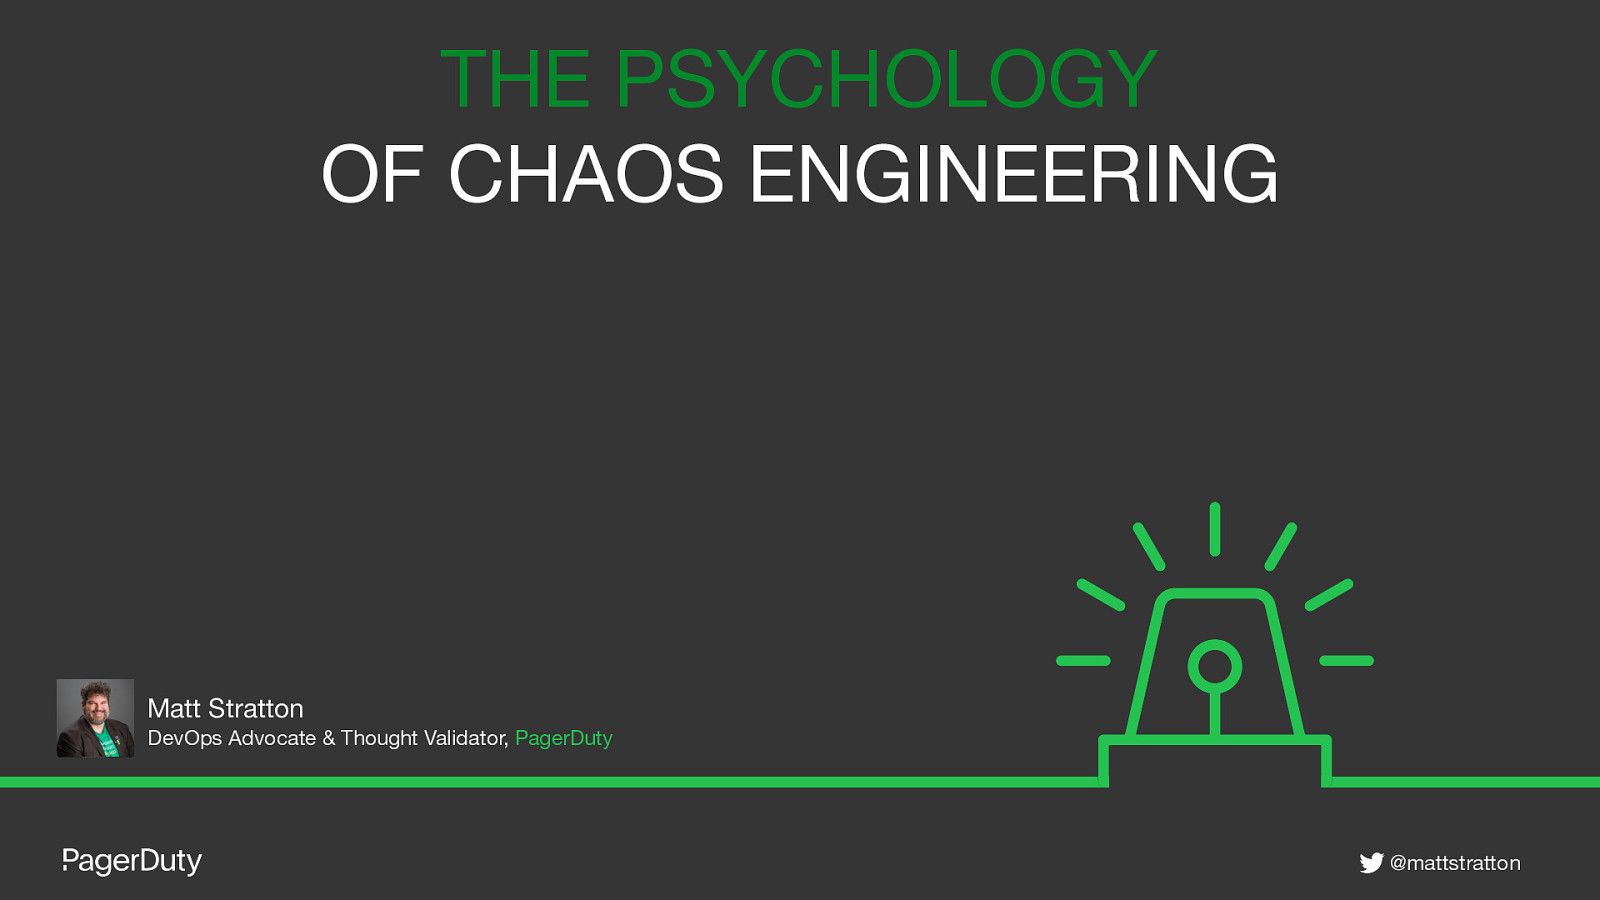 The Psychology of Chaos Engineering